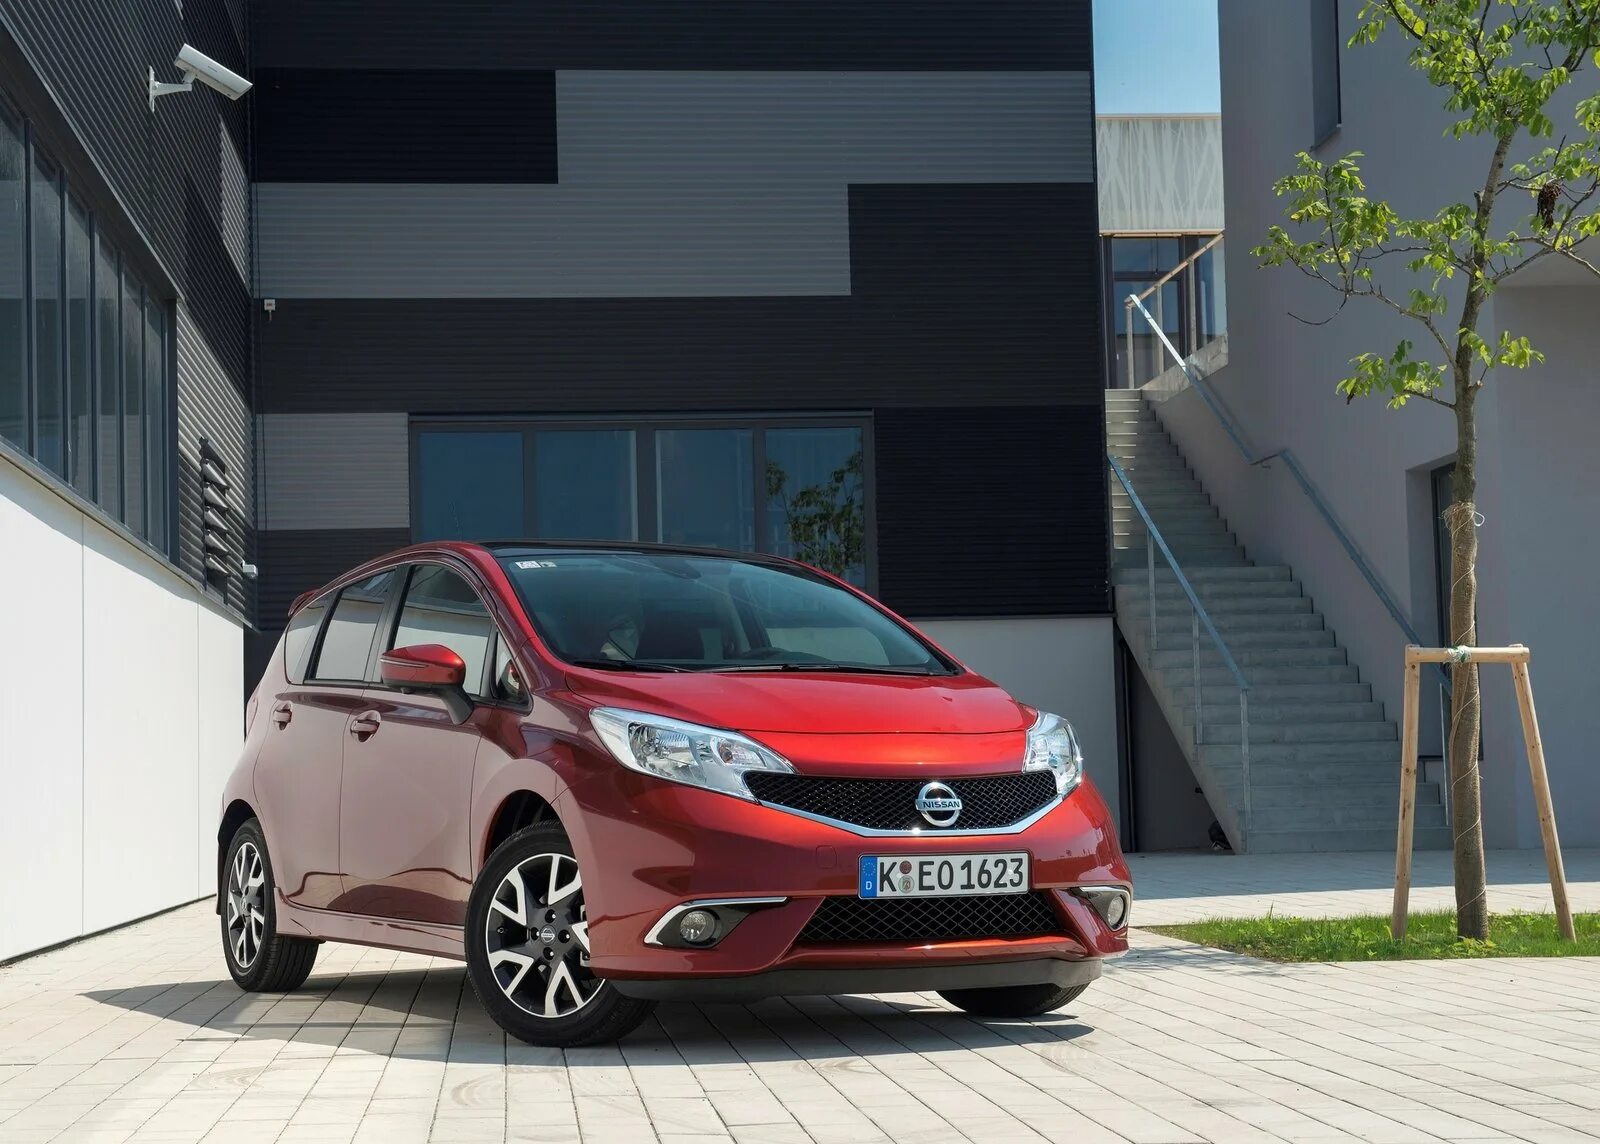 Nissan Note 2014. Nissan Note 2013. Ниссан ноут 2013. Nissan Note 217.